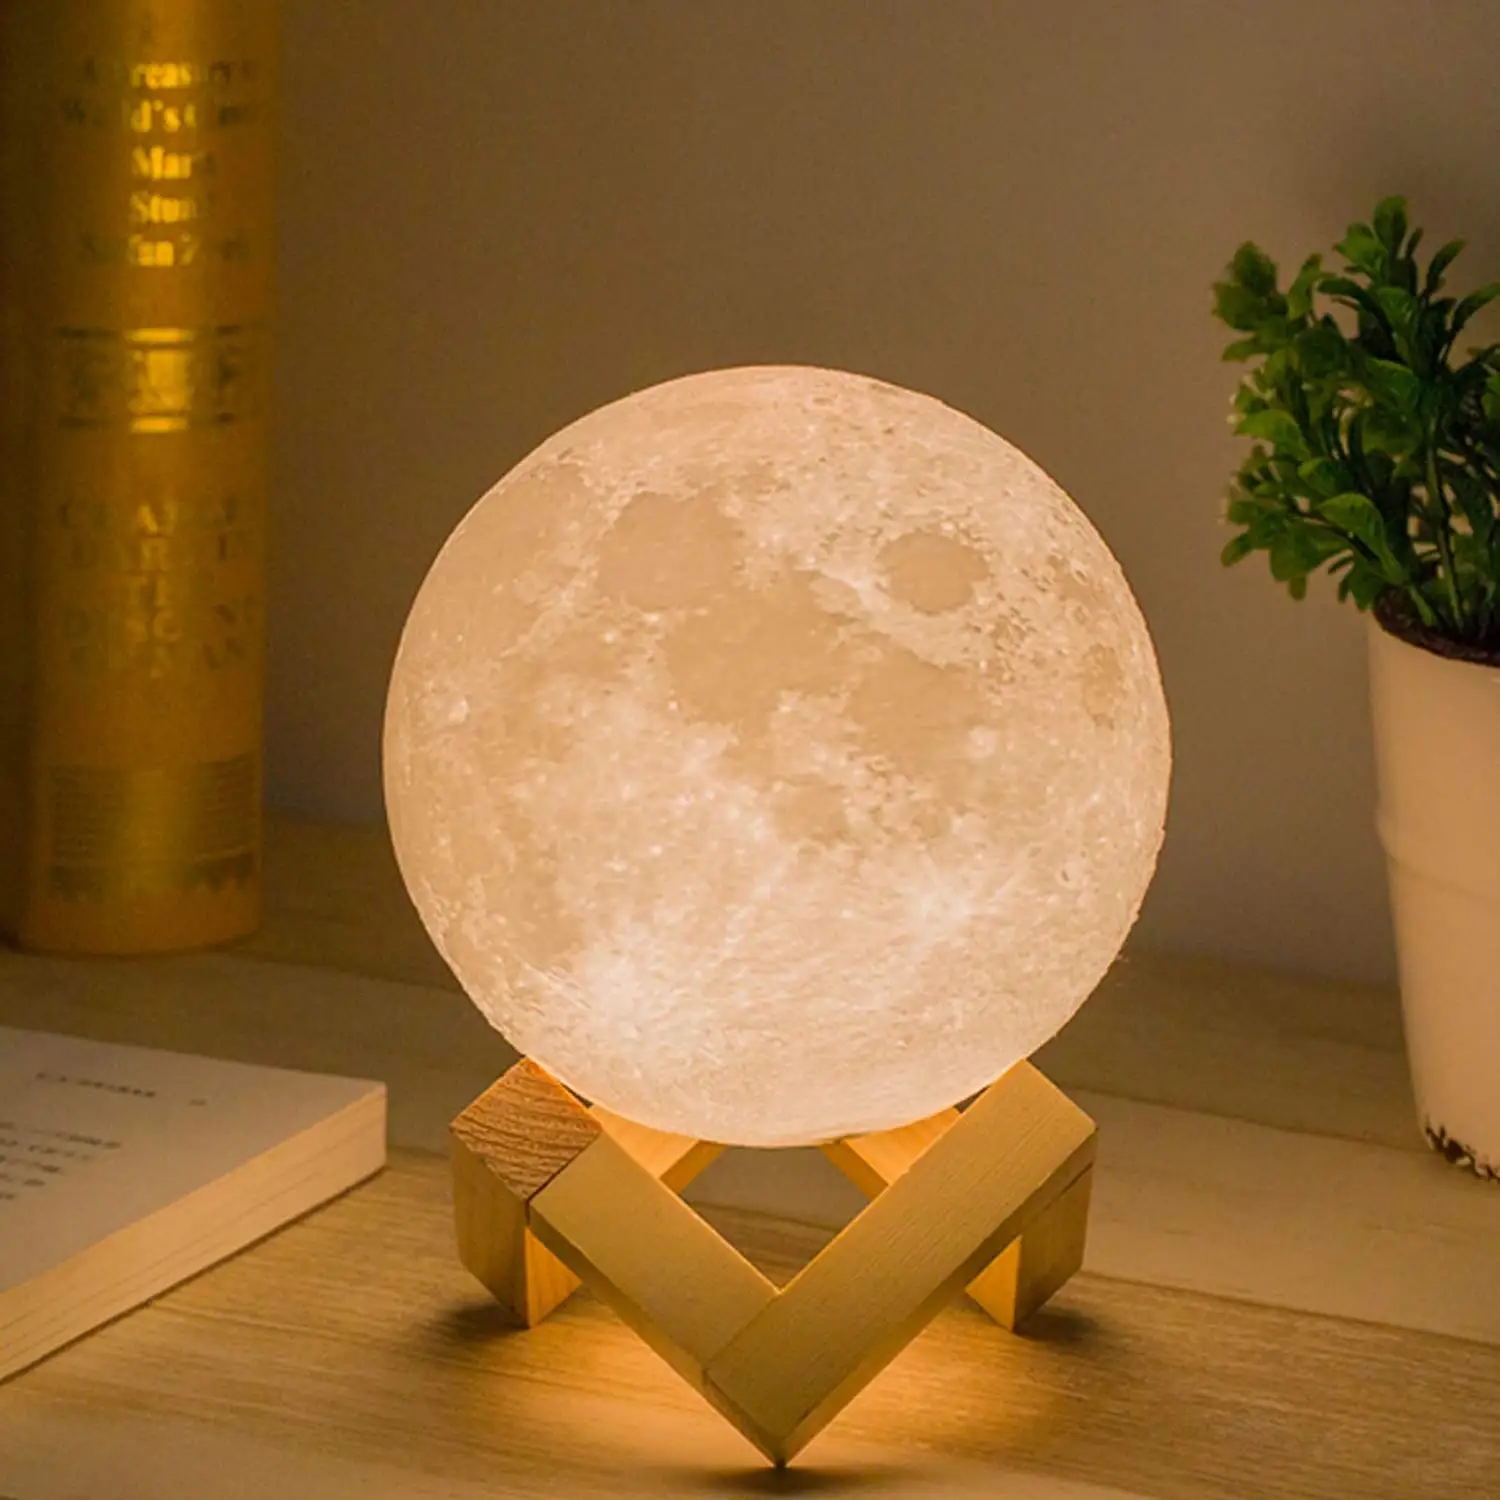 Moon Lamp 16 Colors Touch Night Light With Remote Control And USB Rechargeable LED Night Light For Decoration